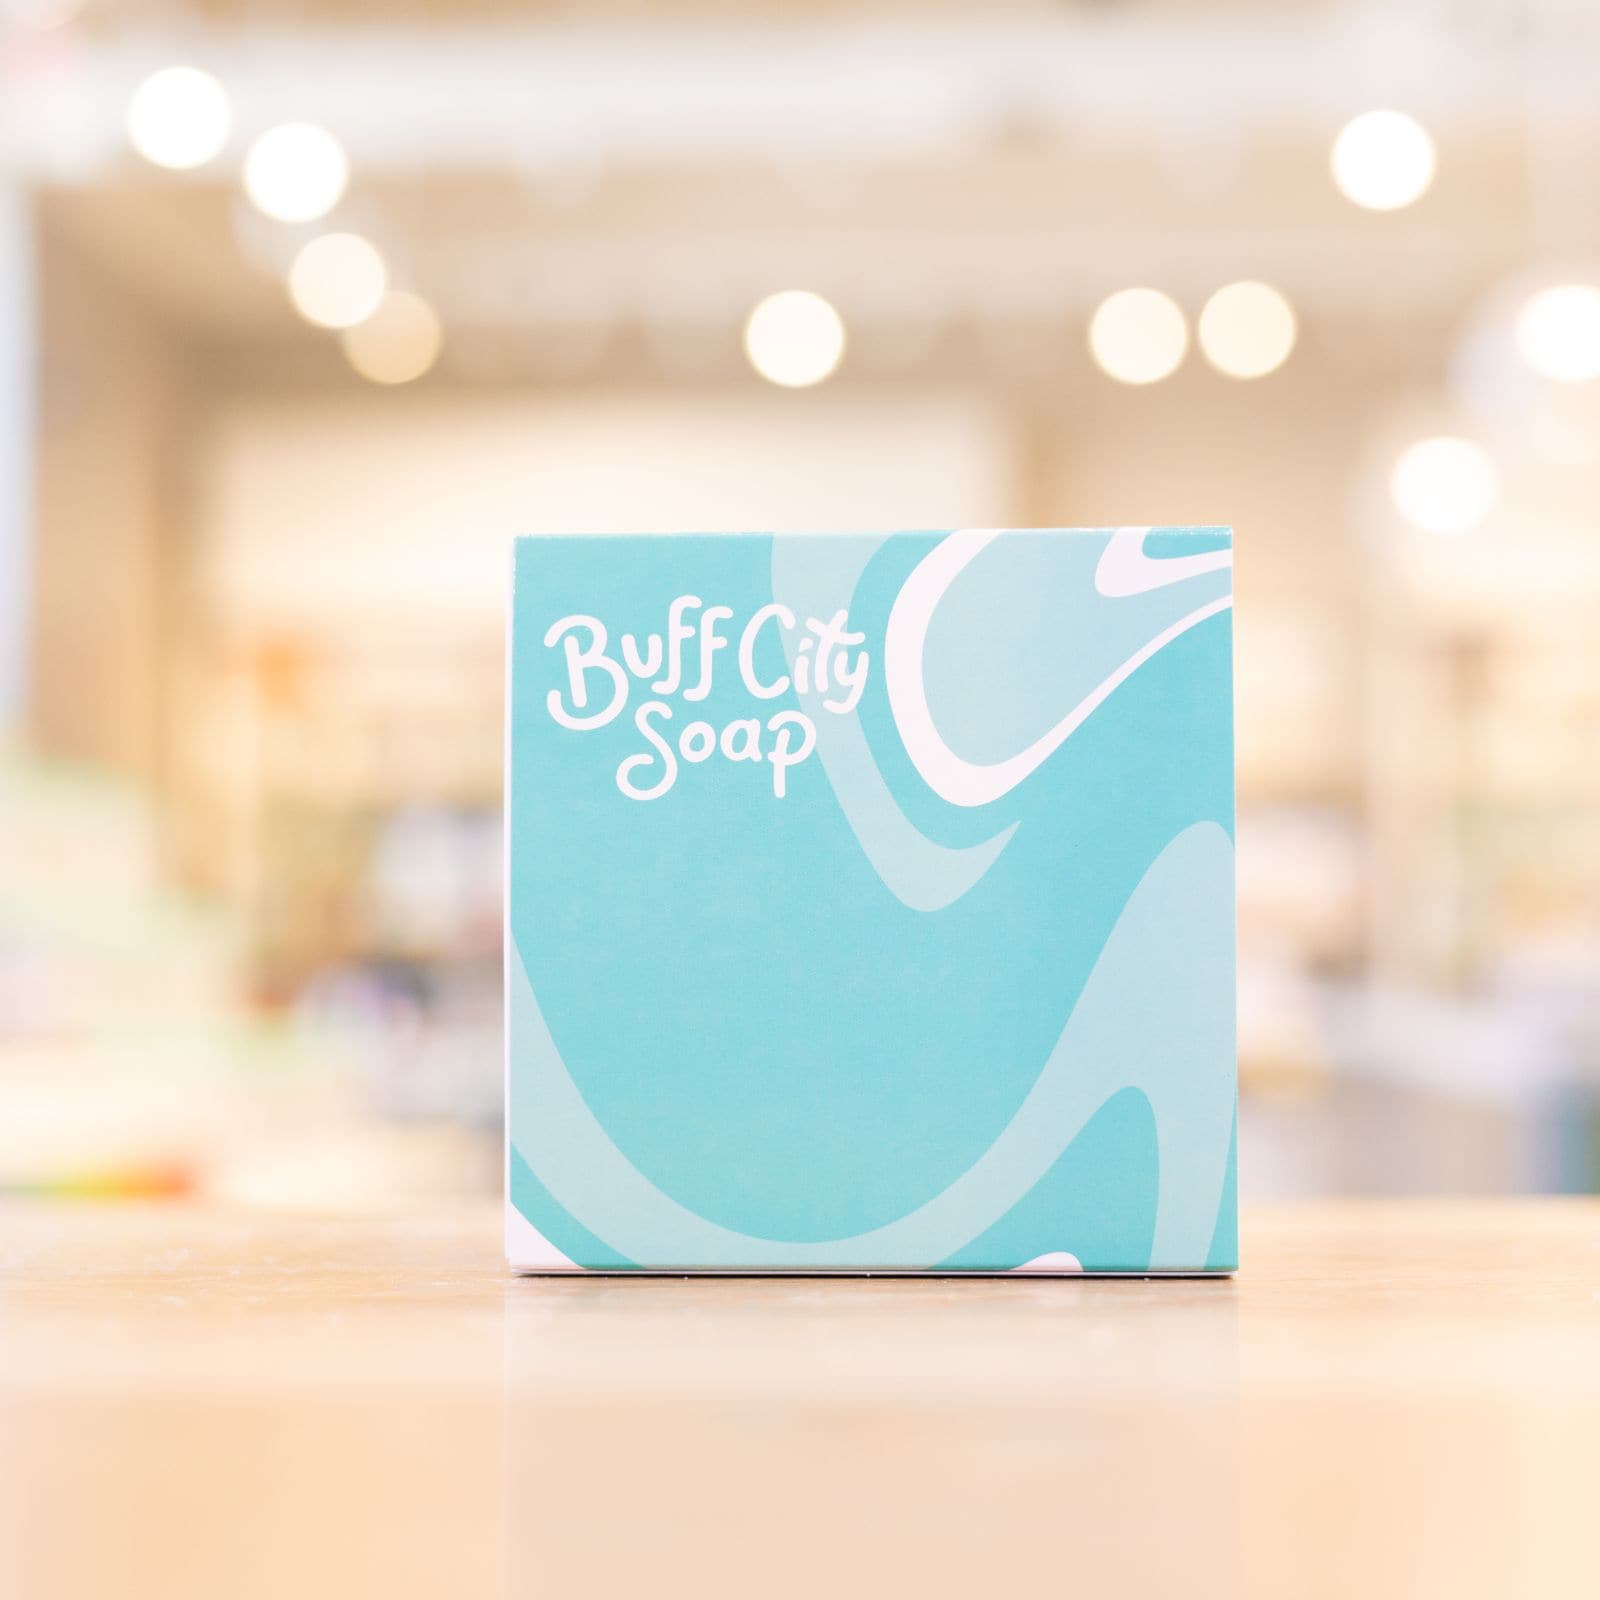 Buff City Soap Gift Set with blue and white packaging on counter